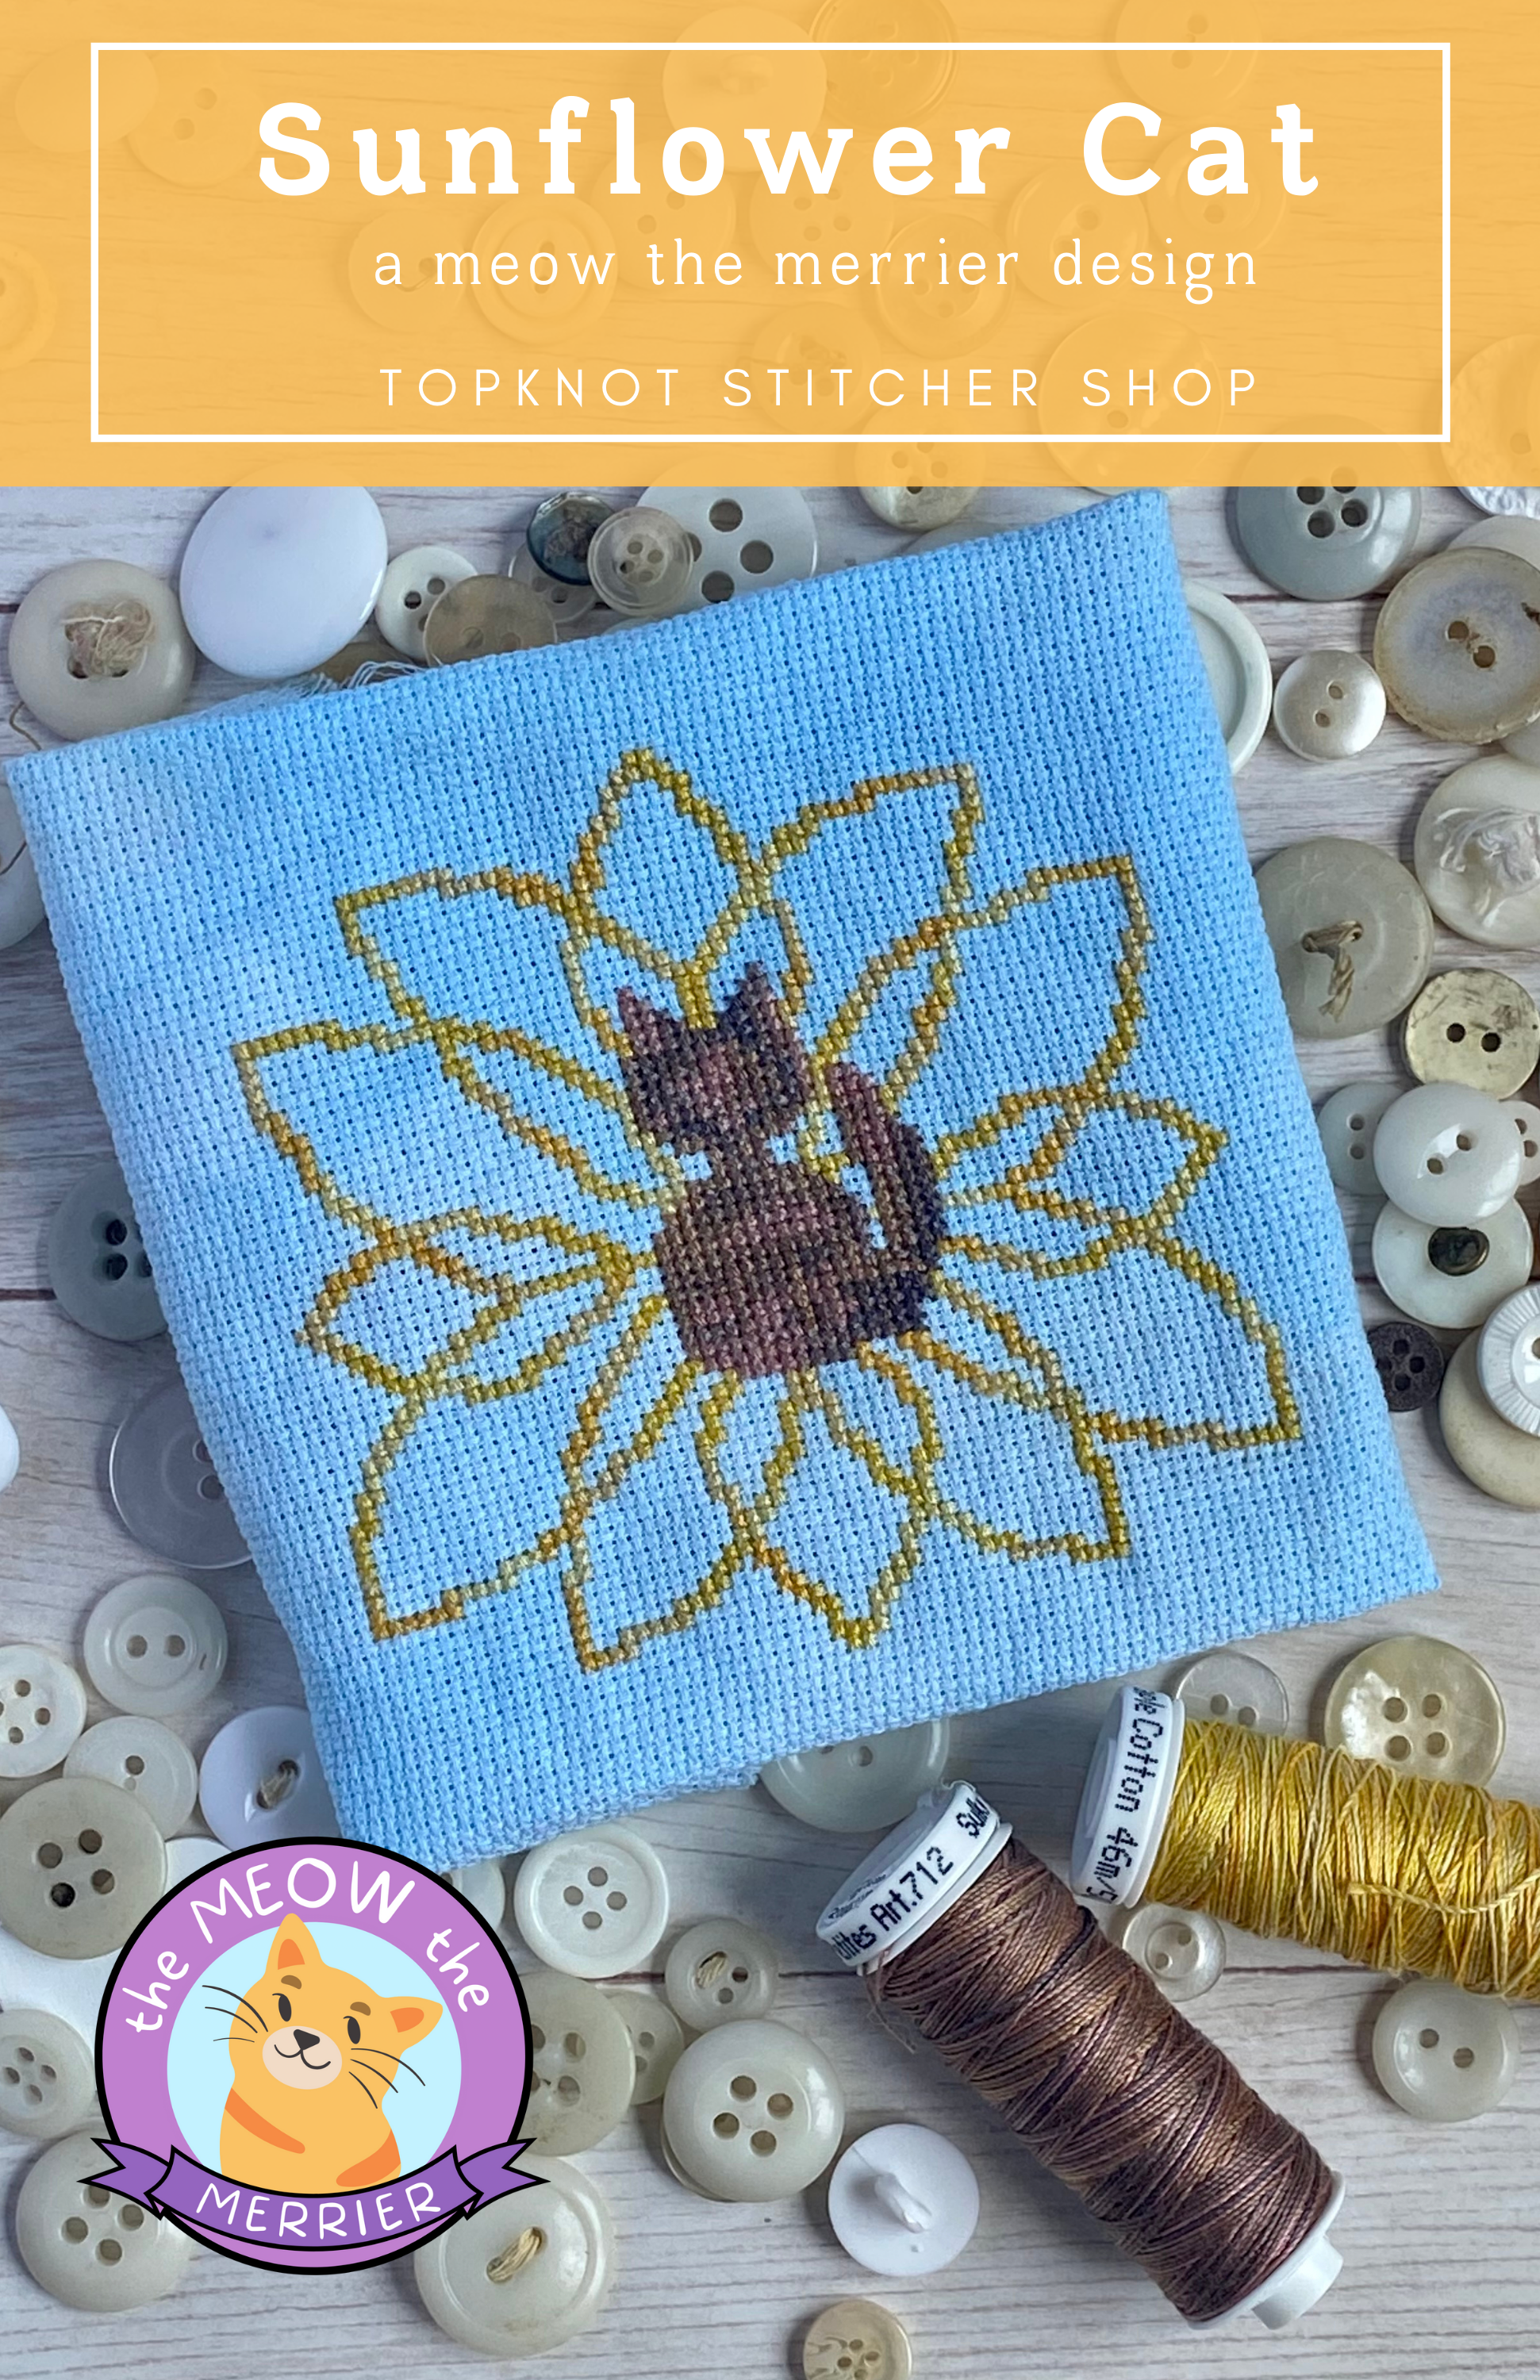 Sunflower Cat - The Meow The Merrier | TopKnot Stitcher Shop - Printed Pattern